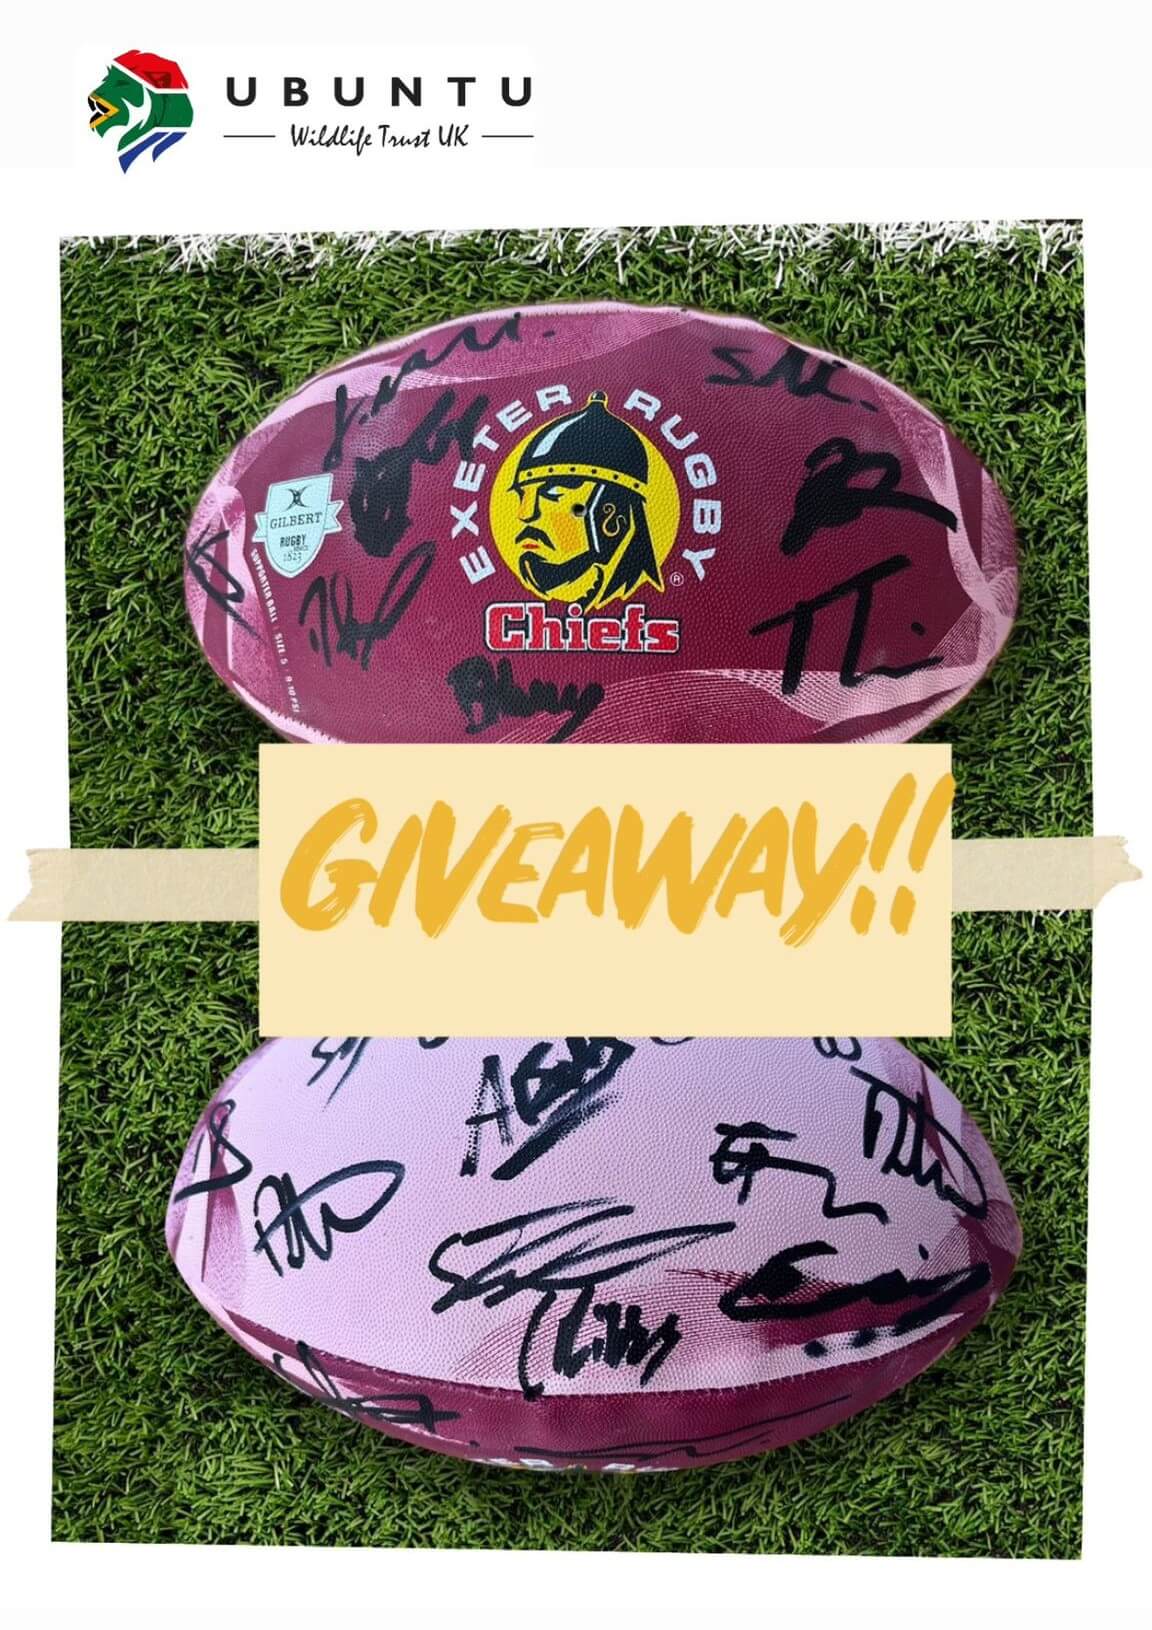 Rugby ball giveaway